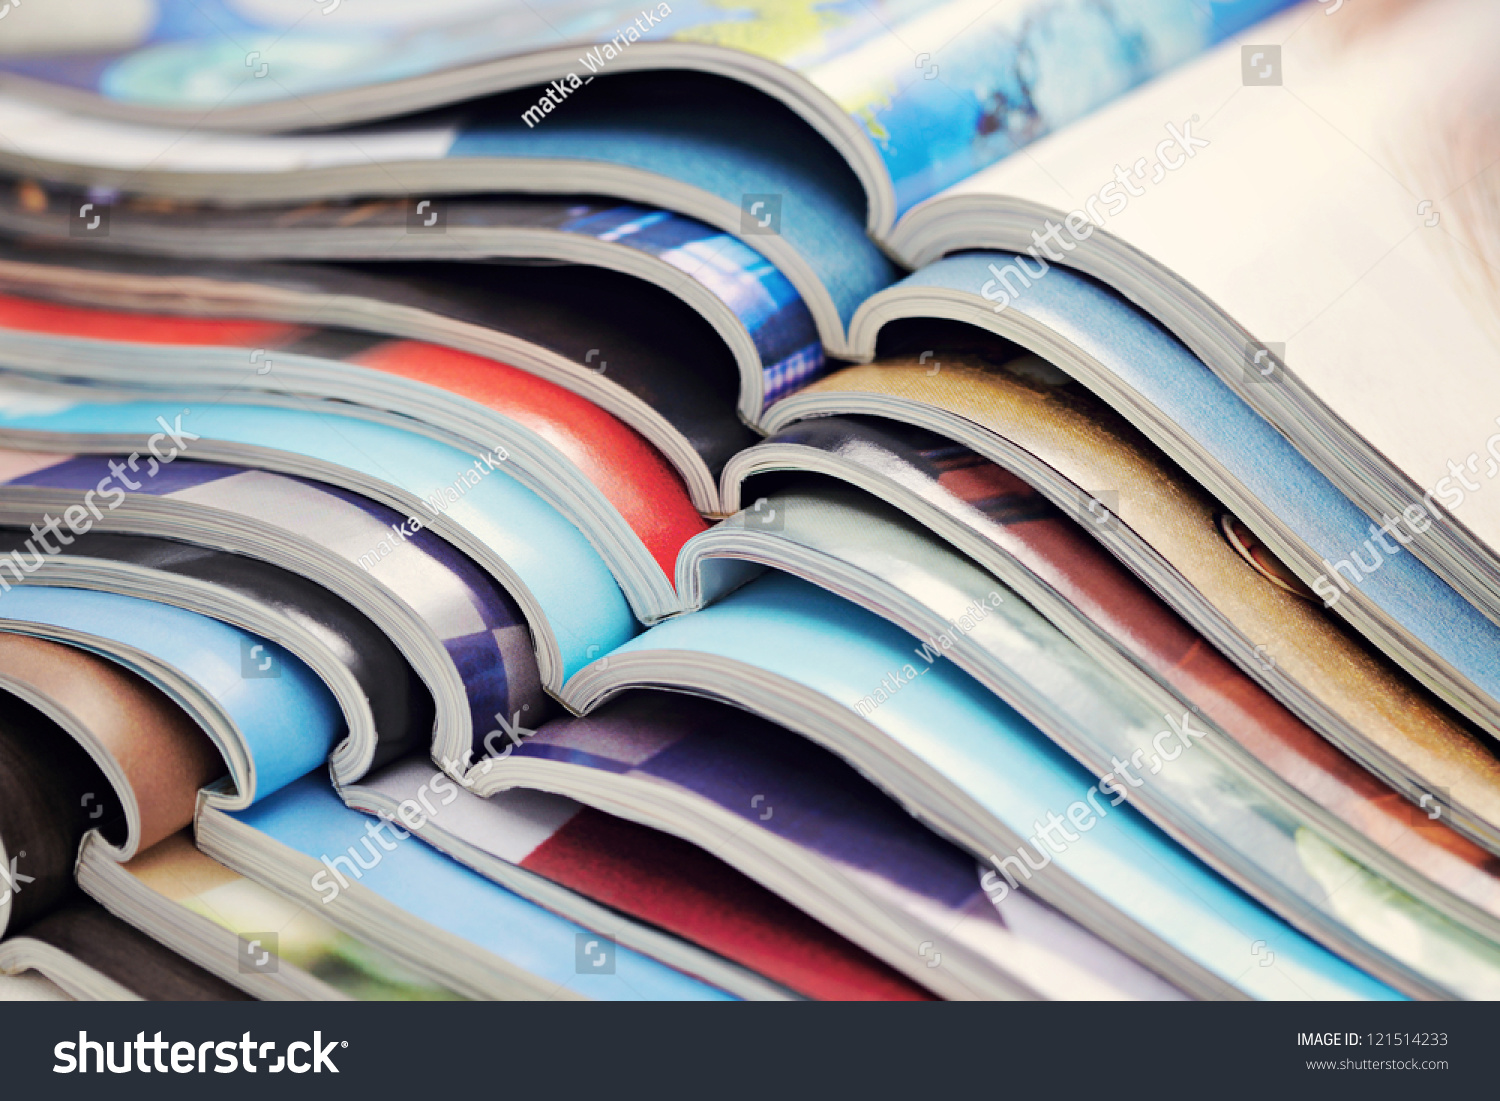 pile of magazines - colorful #121514233